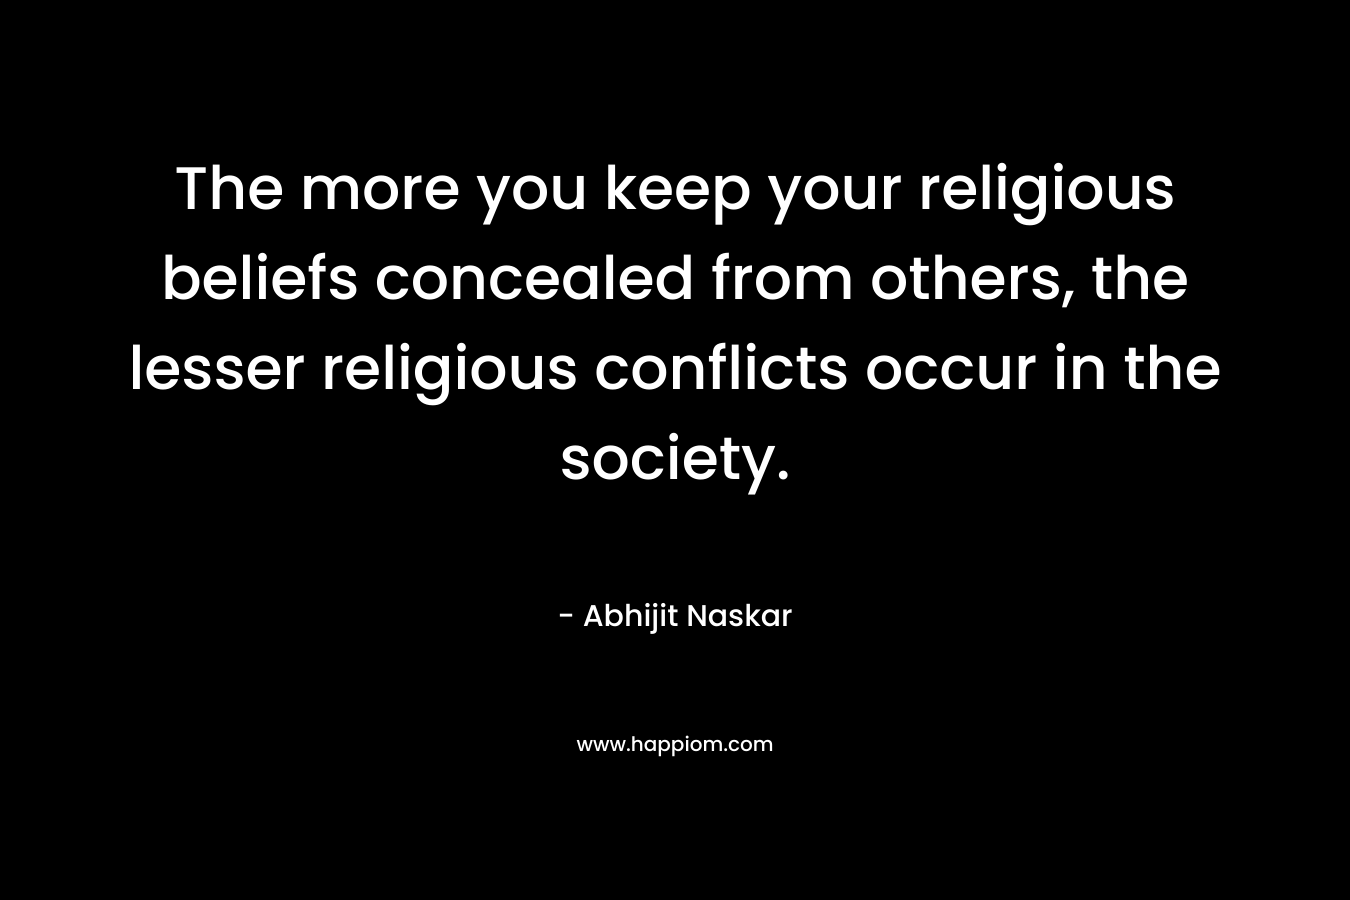 The more you keep your religious beliefs concealed from others, the lesser religious conflicts occur in the society. – Abhijit Naskar